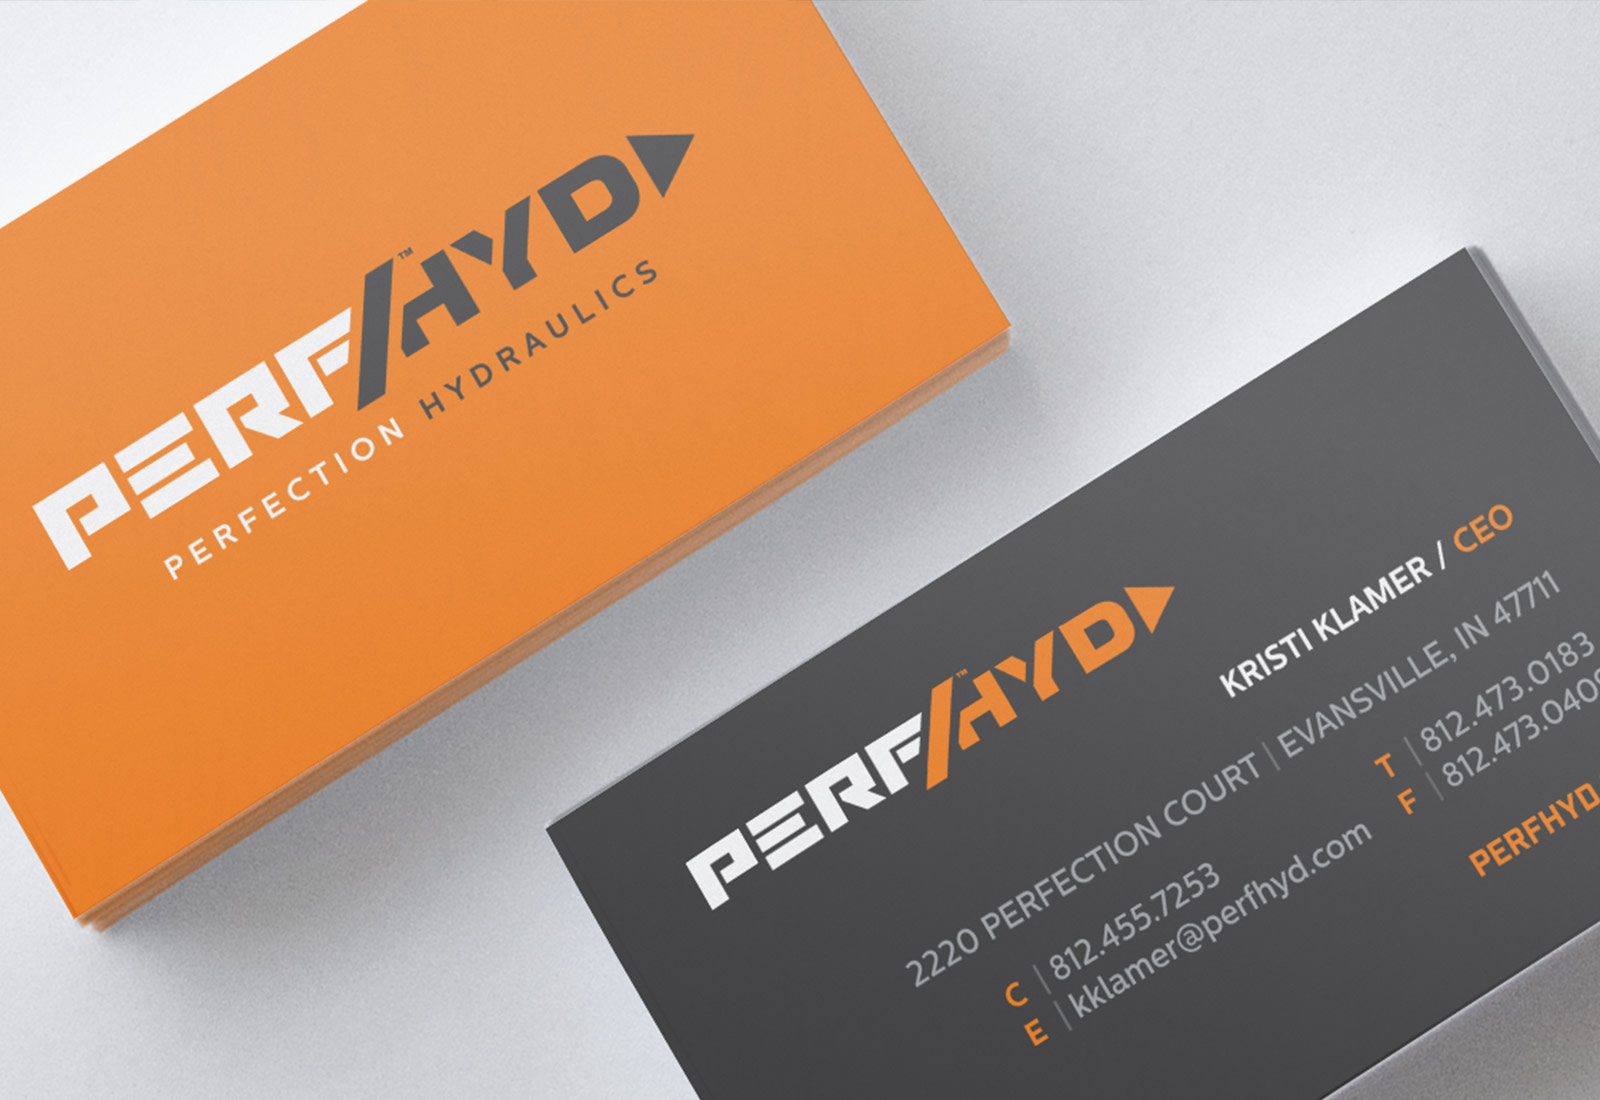 Business Card Design and Printing for Perfection Hydraulics Company in Evansville